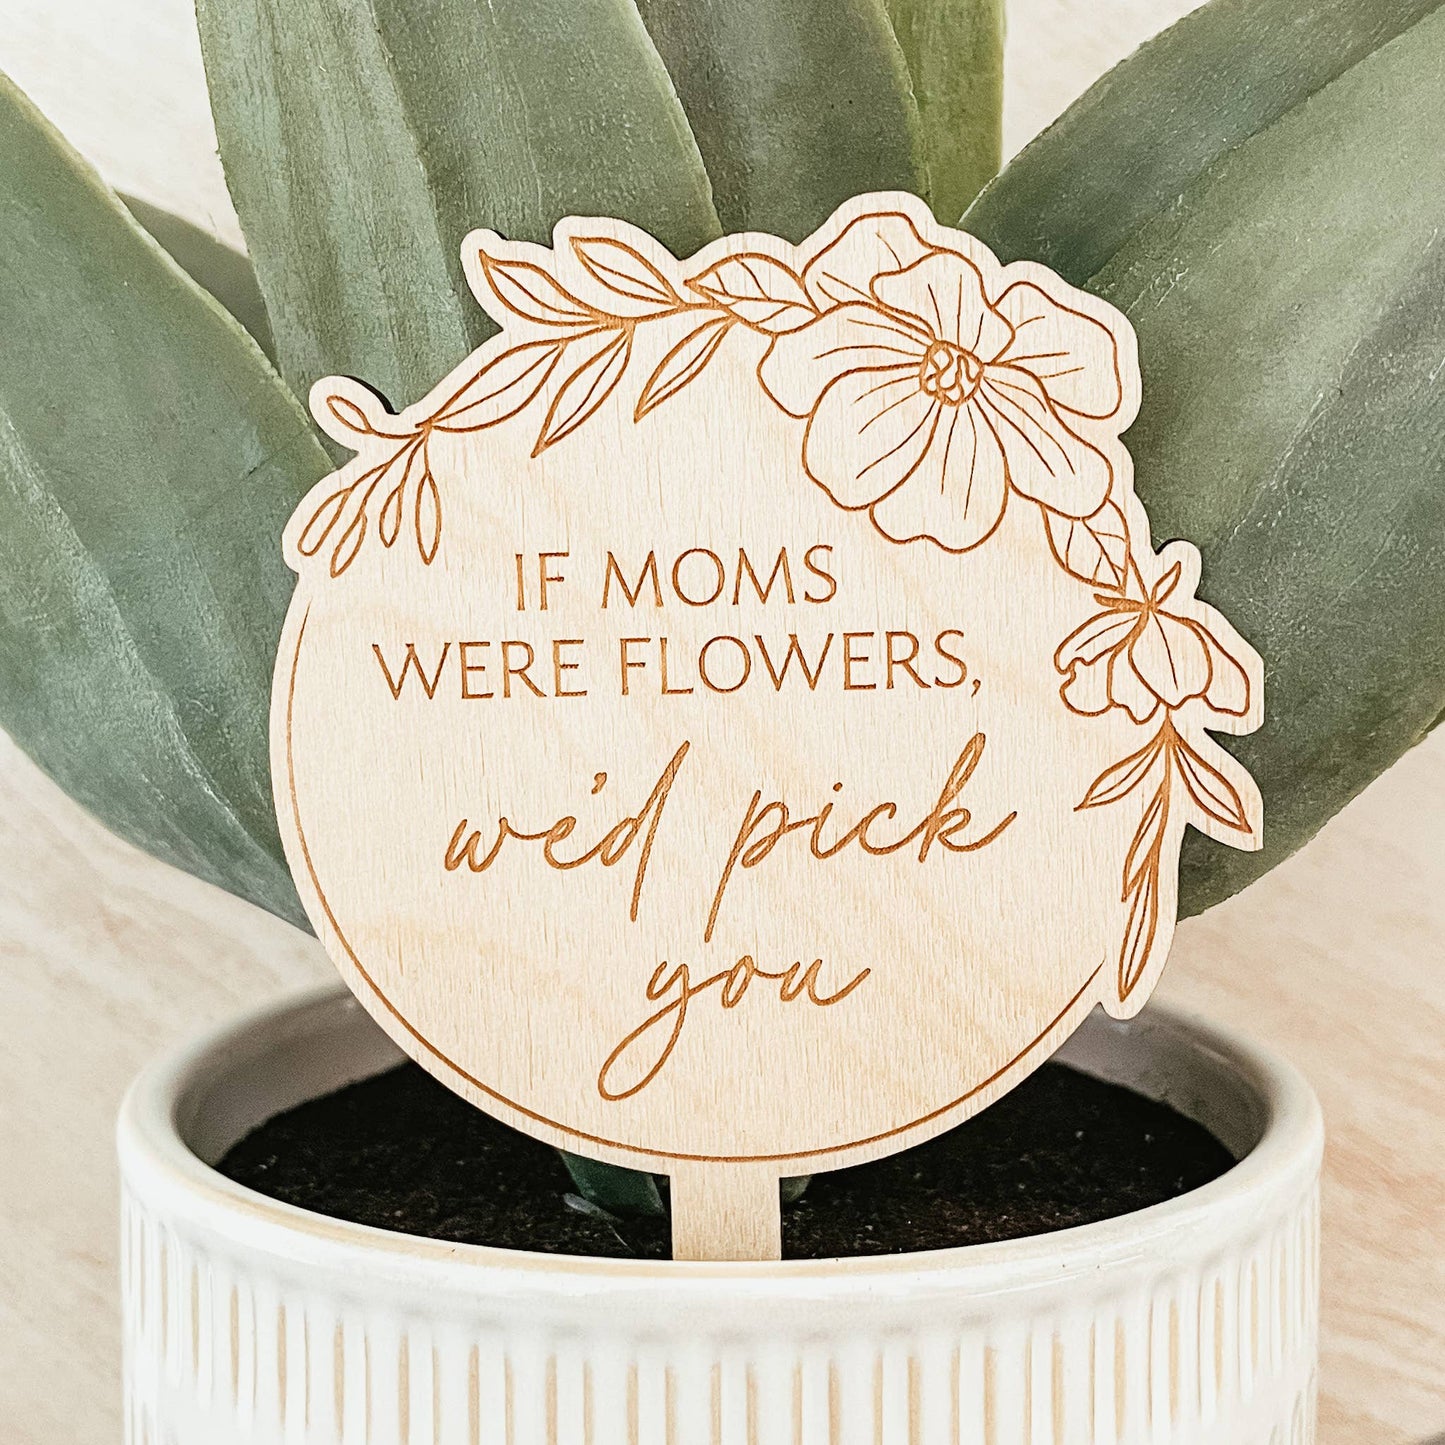 Knotty Design Co. - If Moms Were Flowers Plant Stake